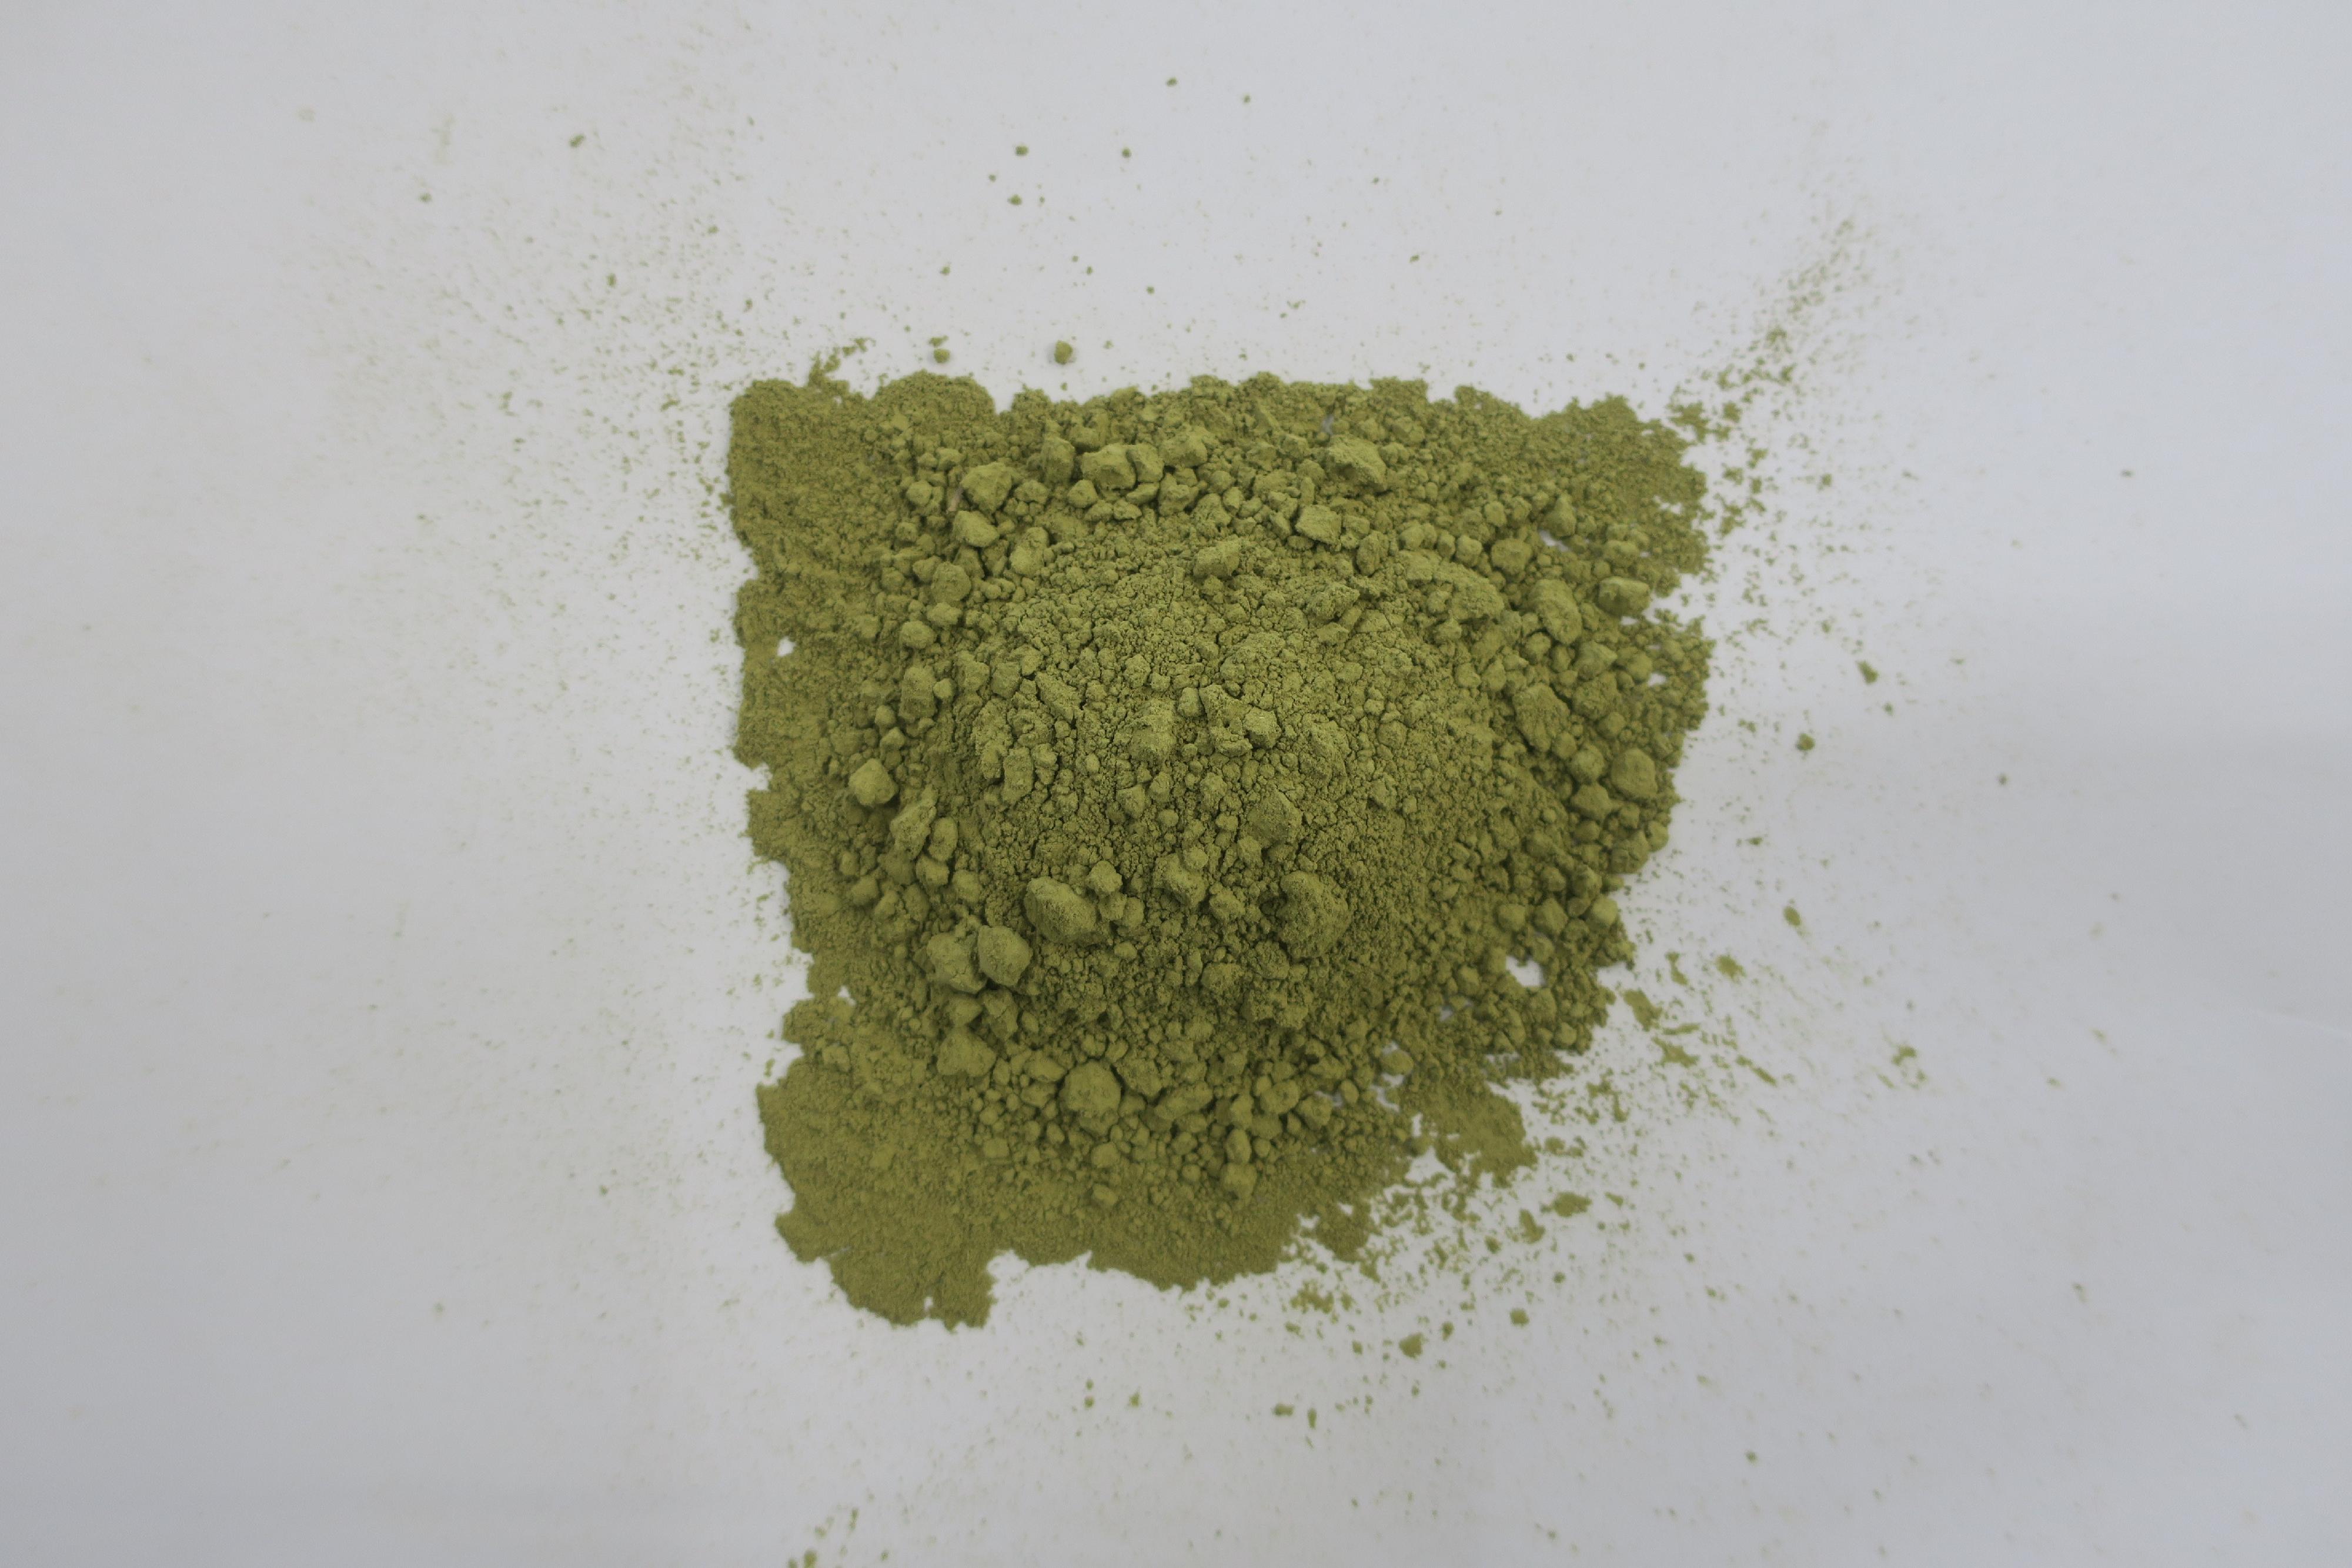 Hong Kong Customs on March 8 and yesterday (March 14) seized a total of about 52 tonnes of suspected mitragynine with an estimated market value of about $138 million at the Kwai Chung Customhouse Cargo Examination Compound. Photo shows the green powder suspected to be mitragynine.